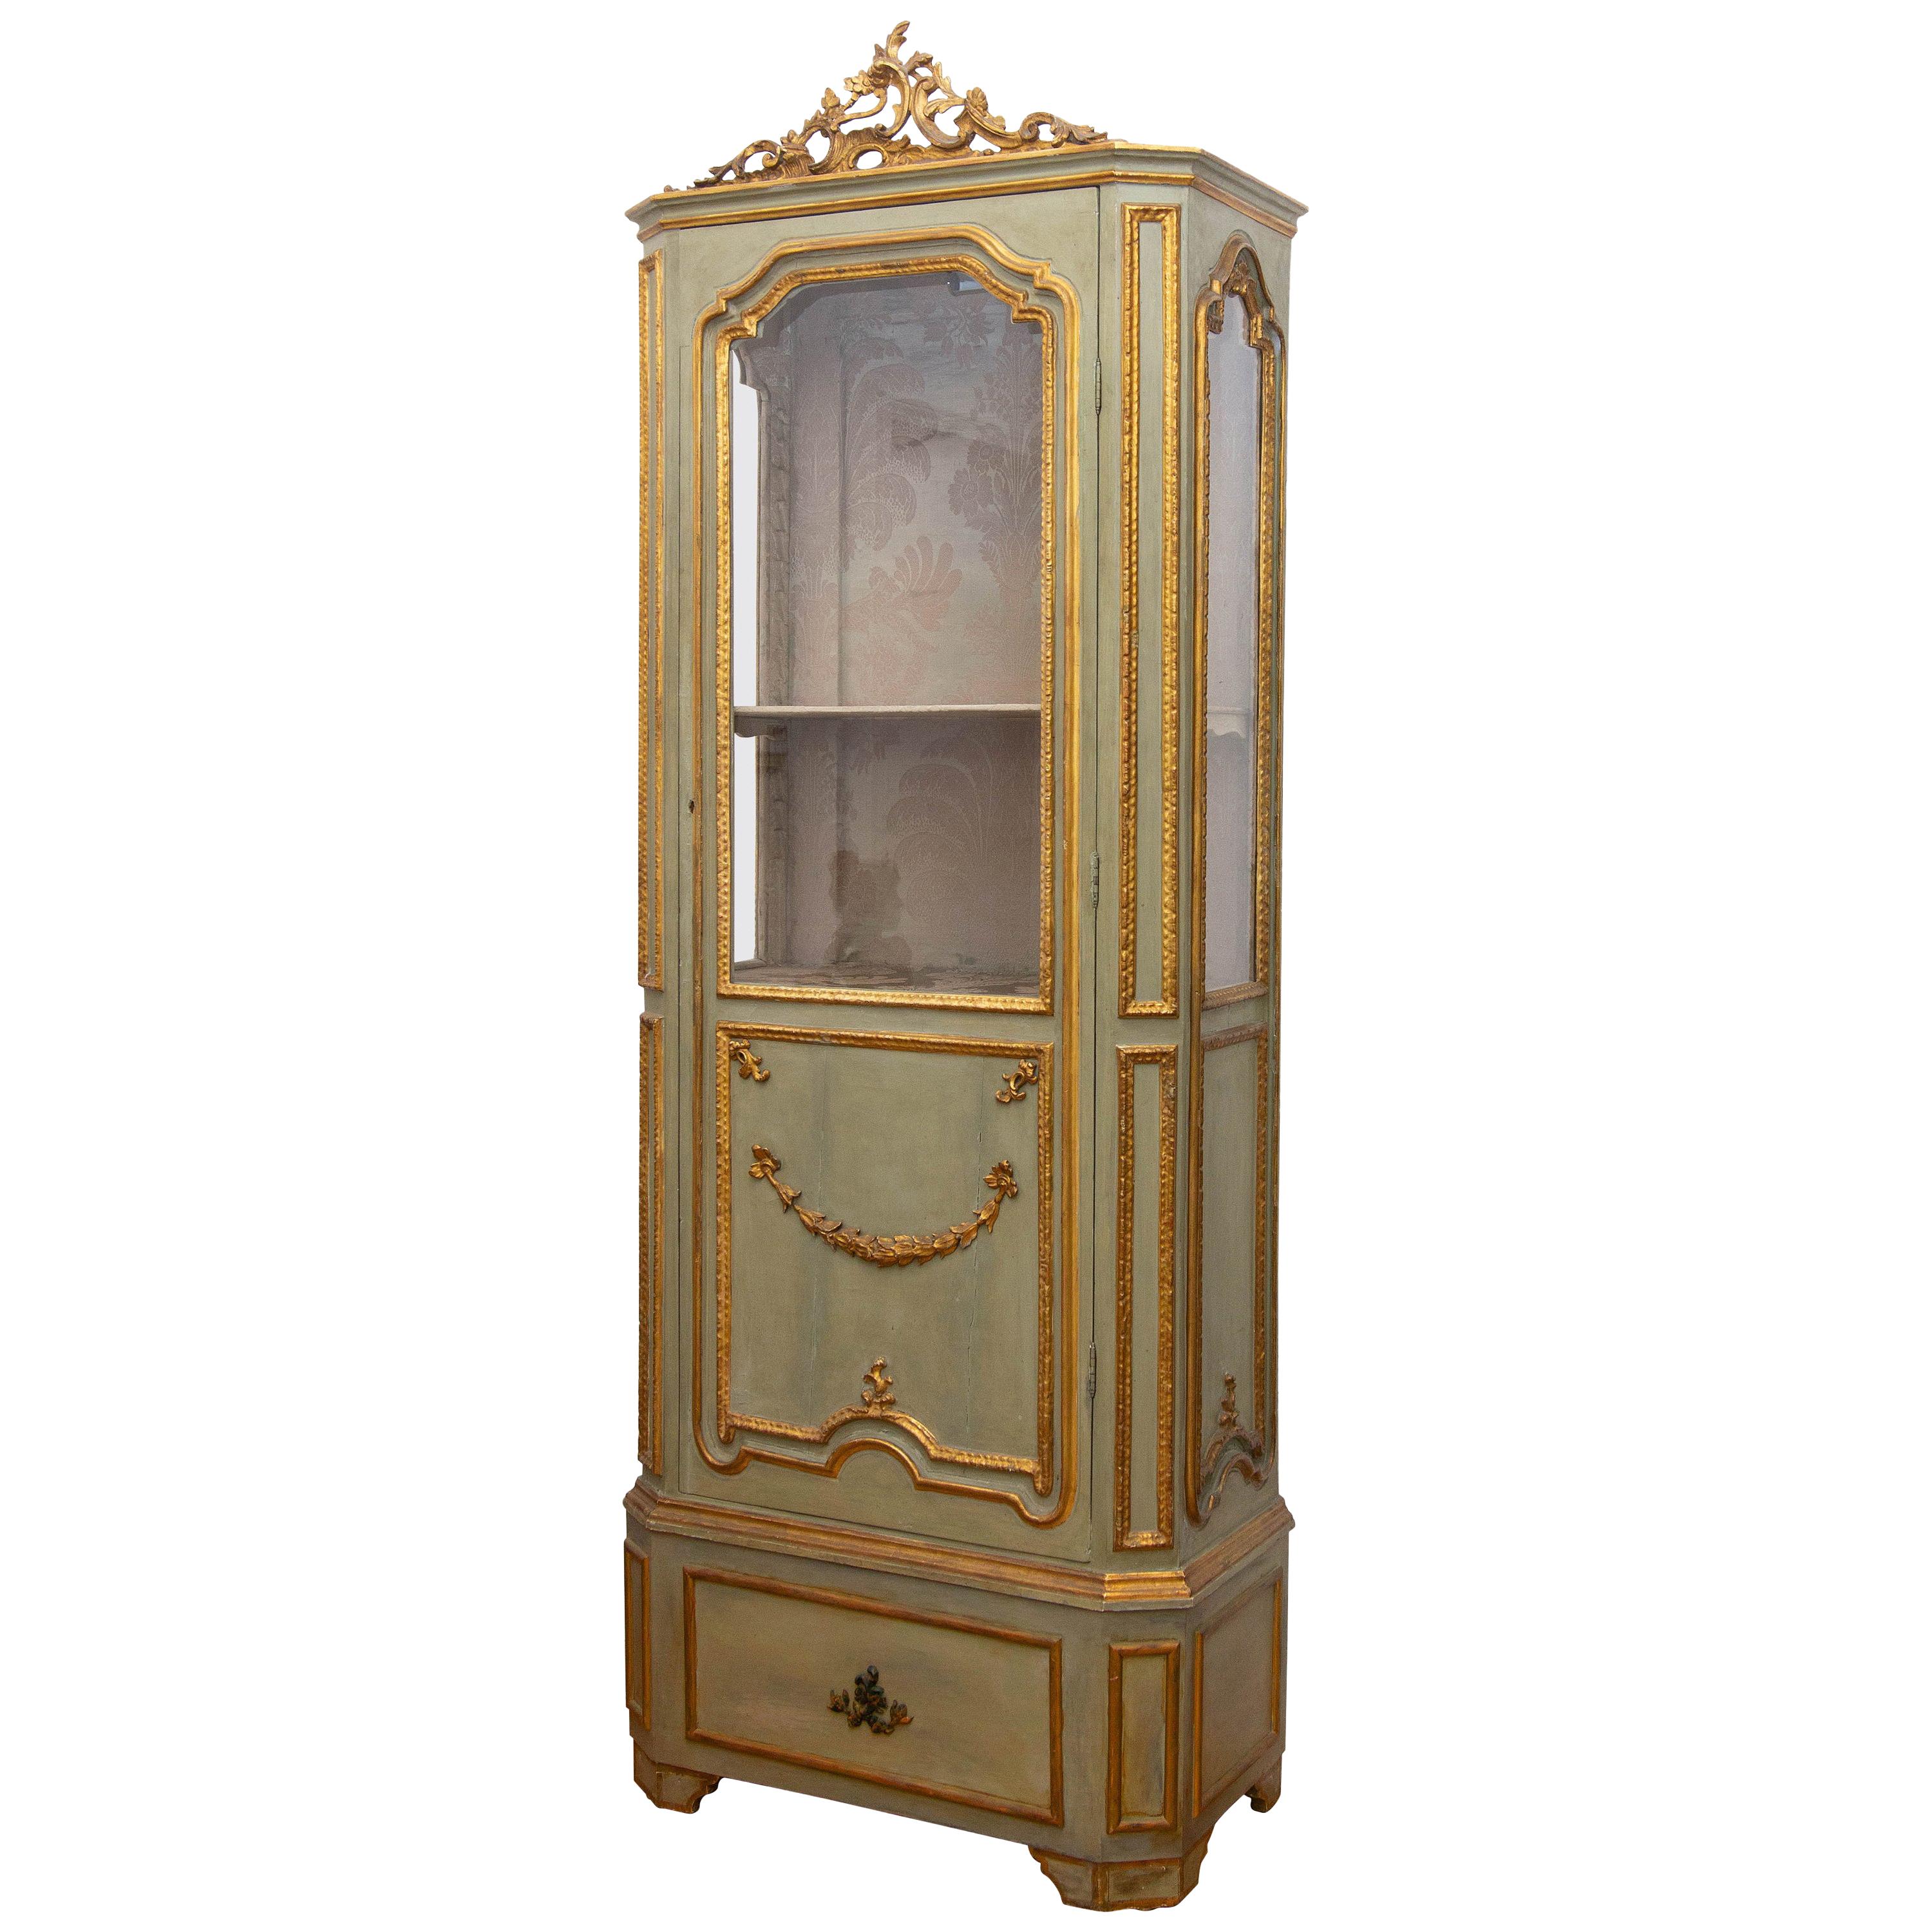 Is curio cabinet short for curiosity cabinet?